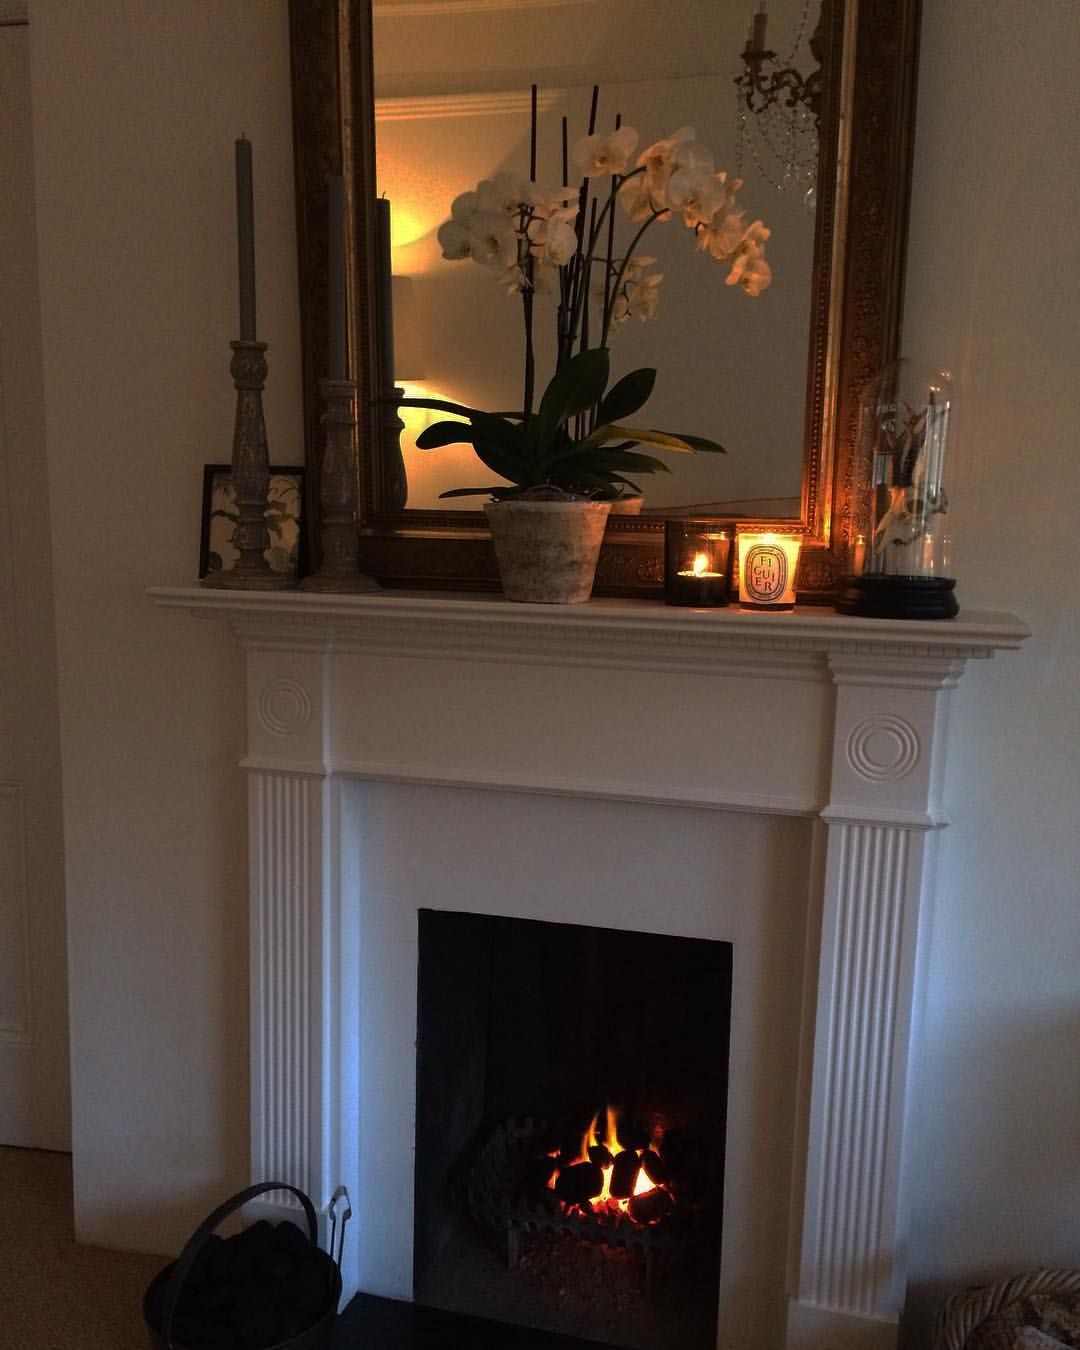 How to Work A Fireplace Luxury Mylittlevictorianhome On Instagram “after Such A Busy Day